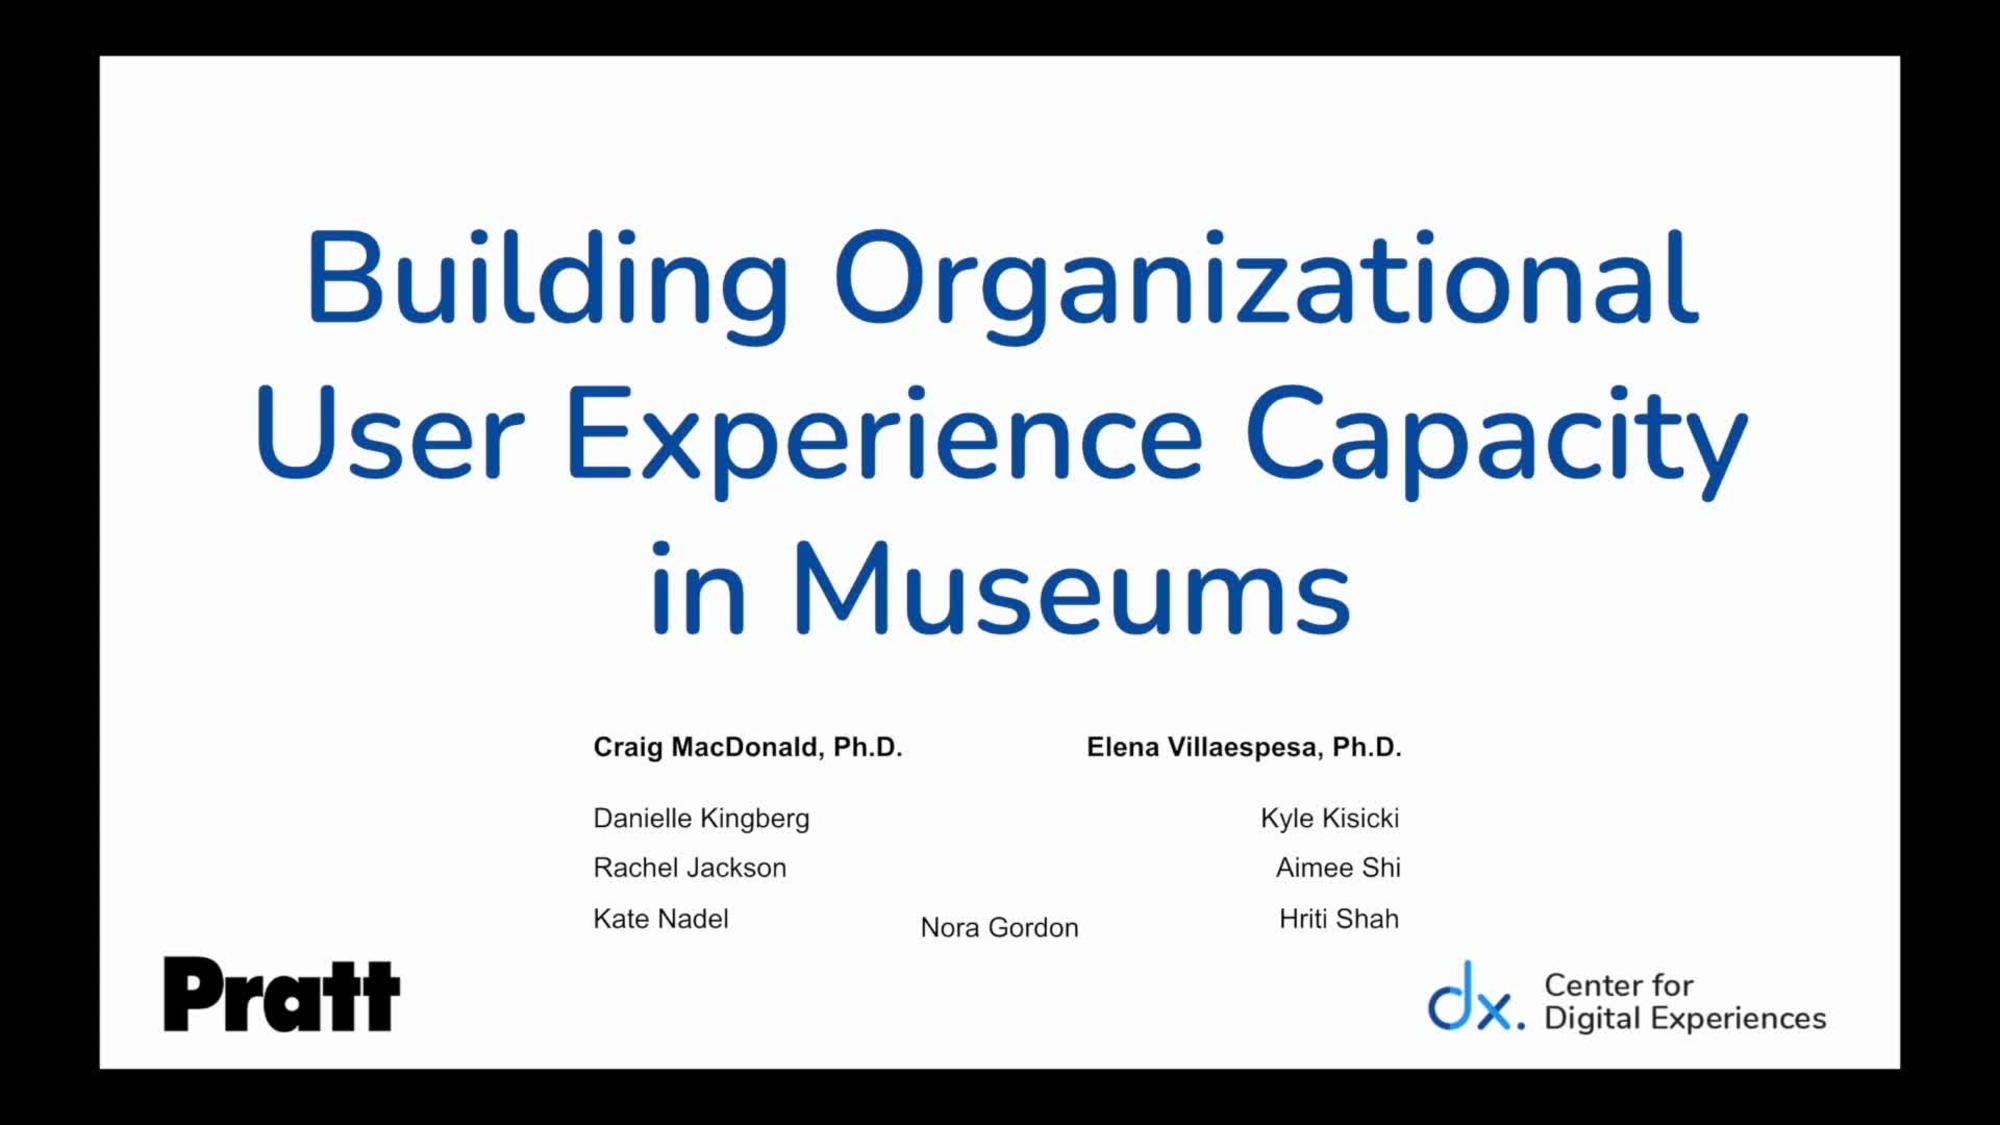 Building Organizational User Experience Capacity in Museums